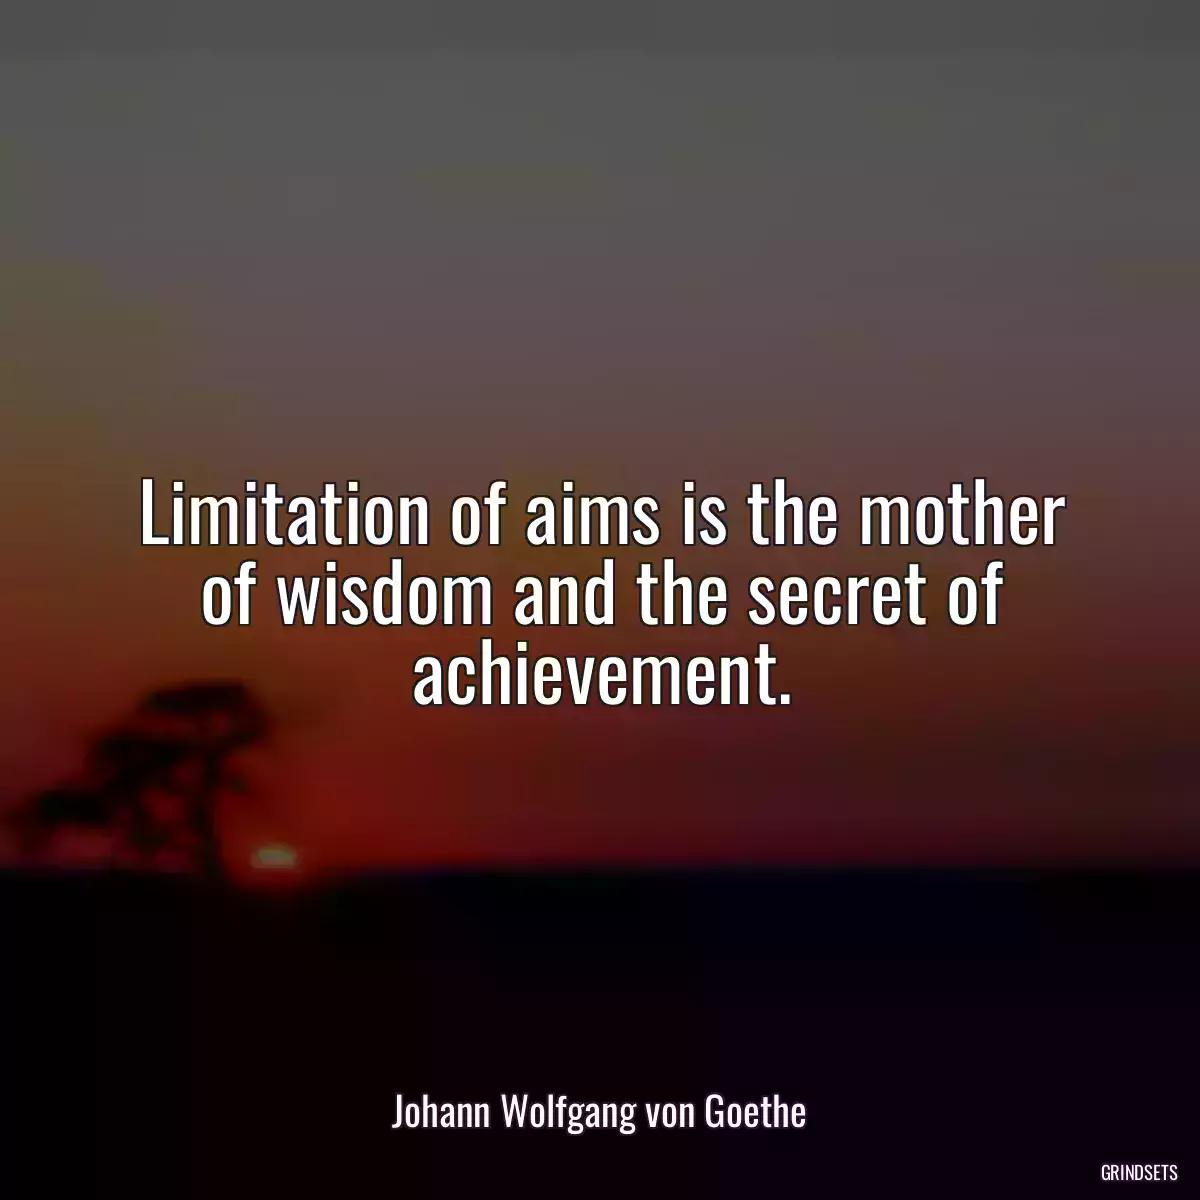 Limitation of aims is the mother of wisdom and the secret of achievement.